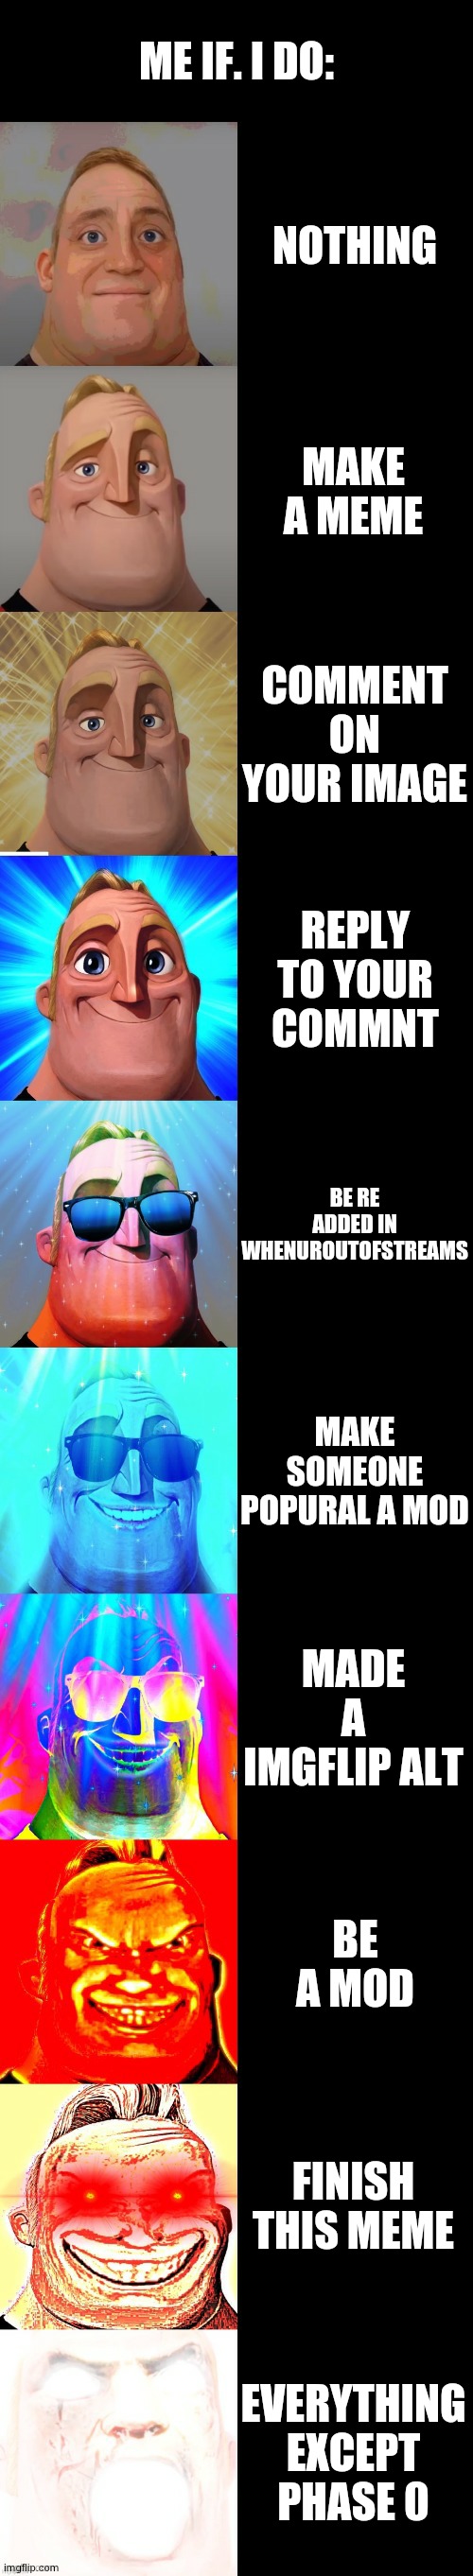 true | ME IF. I DO:; NOTHING; MAKE A MEME; COMMENT ON YOUR IMAGE; REPLY TO YOUR COMMNT; BE RE ADDED IN WHENUROUTOFSTREAMS; MAKE SOMEONE POPURAL A MOD; MADE A IMGFLIP ALT; BE A MOD; FINISH THIS MEME; EVERYTHING EXCEPT PHASE 0 | image tagged in mr incredible becoming canny | made w/ Imgflip meme maker